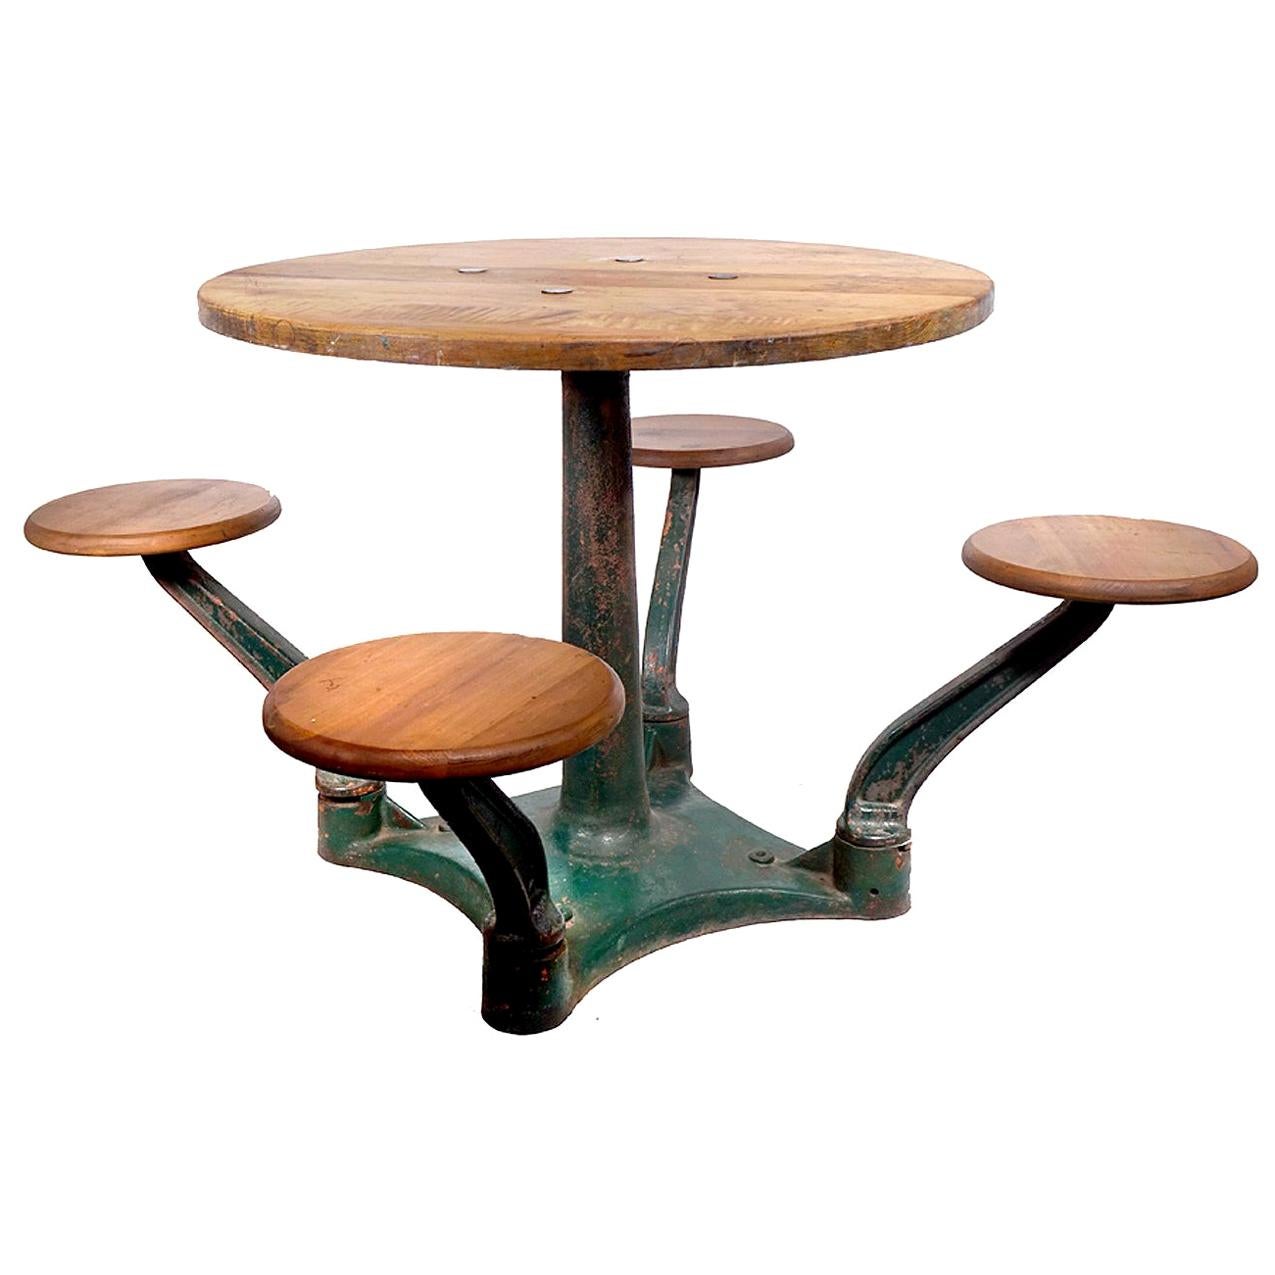 1870s Train Caboose Table and Stools